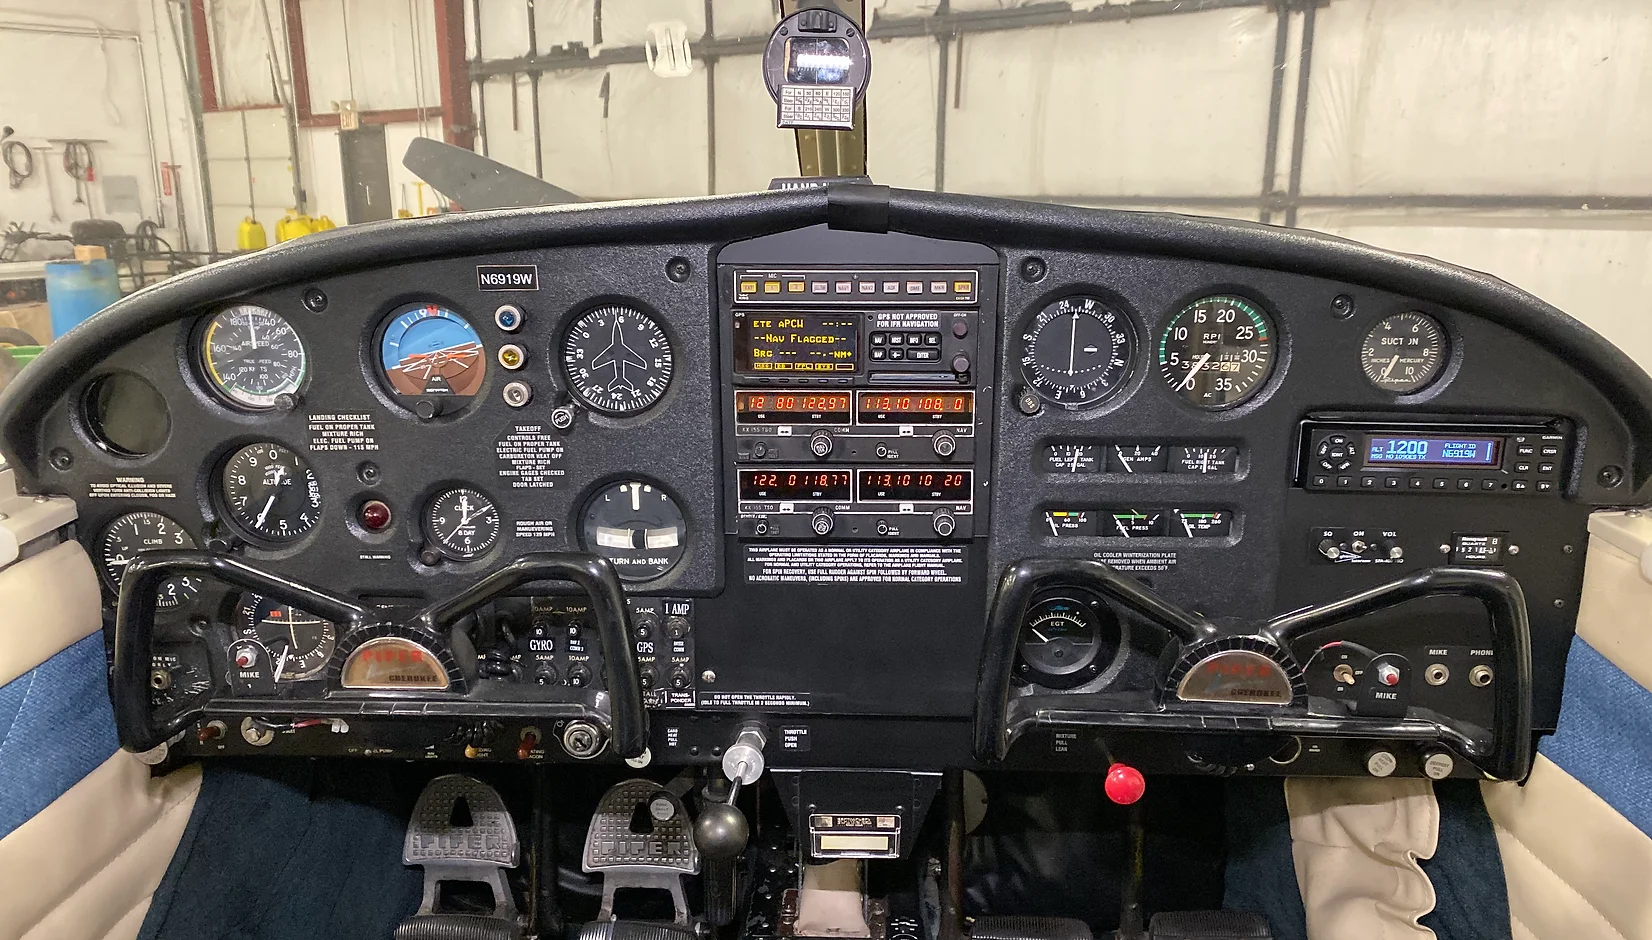 Piper Cherokee Cockpit | Griffing Private Air Charter Plane Flying Service in Port Clinton Ohio